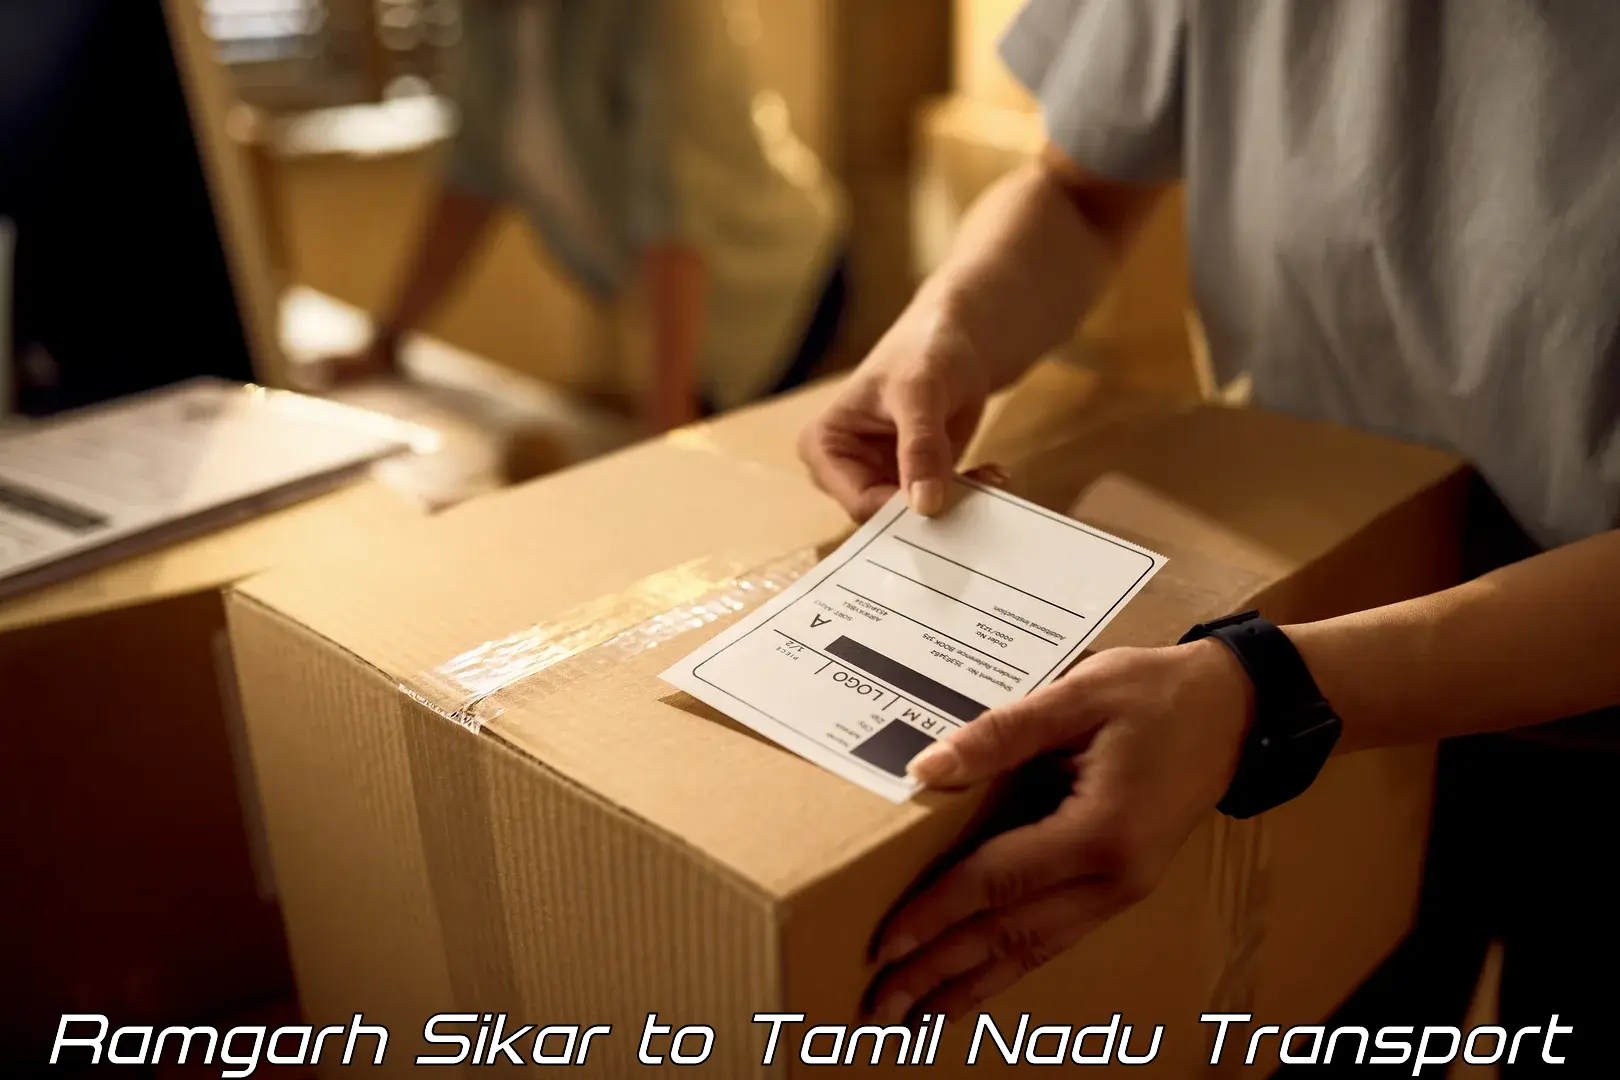 Container transport service Ramgarh Sikar to Dharapuram